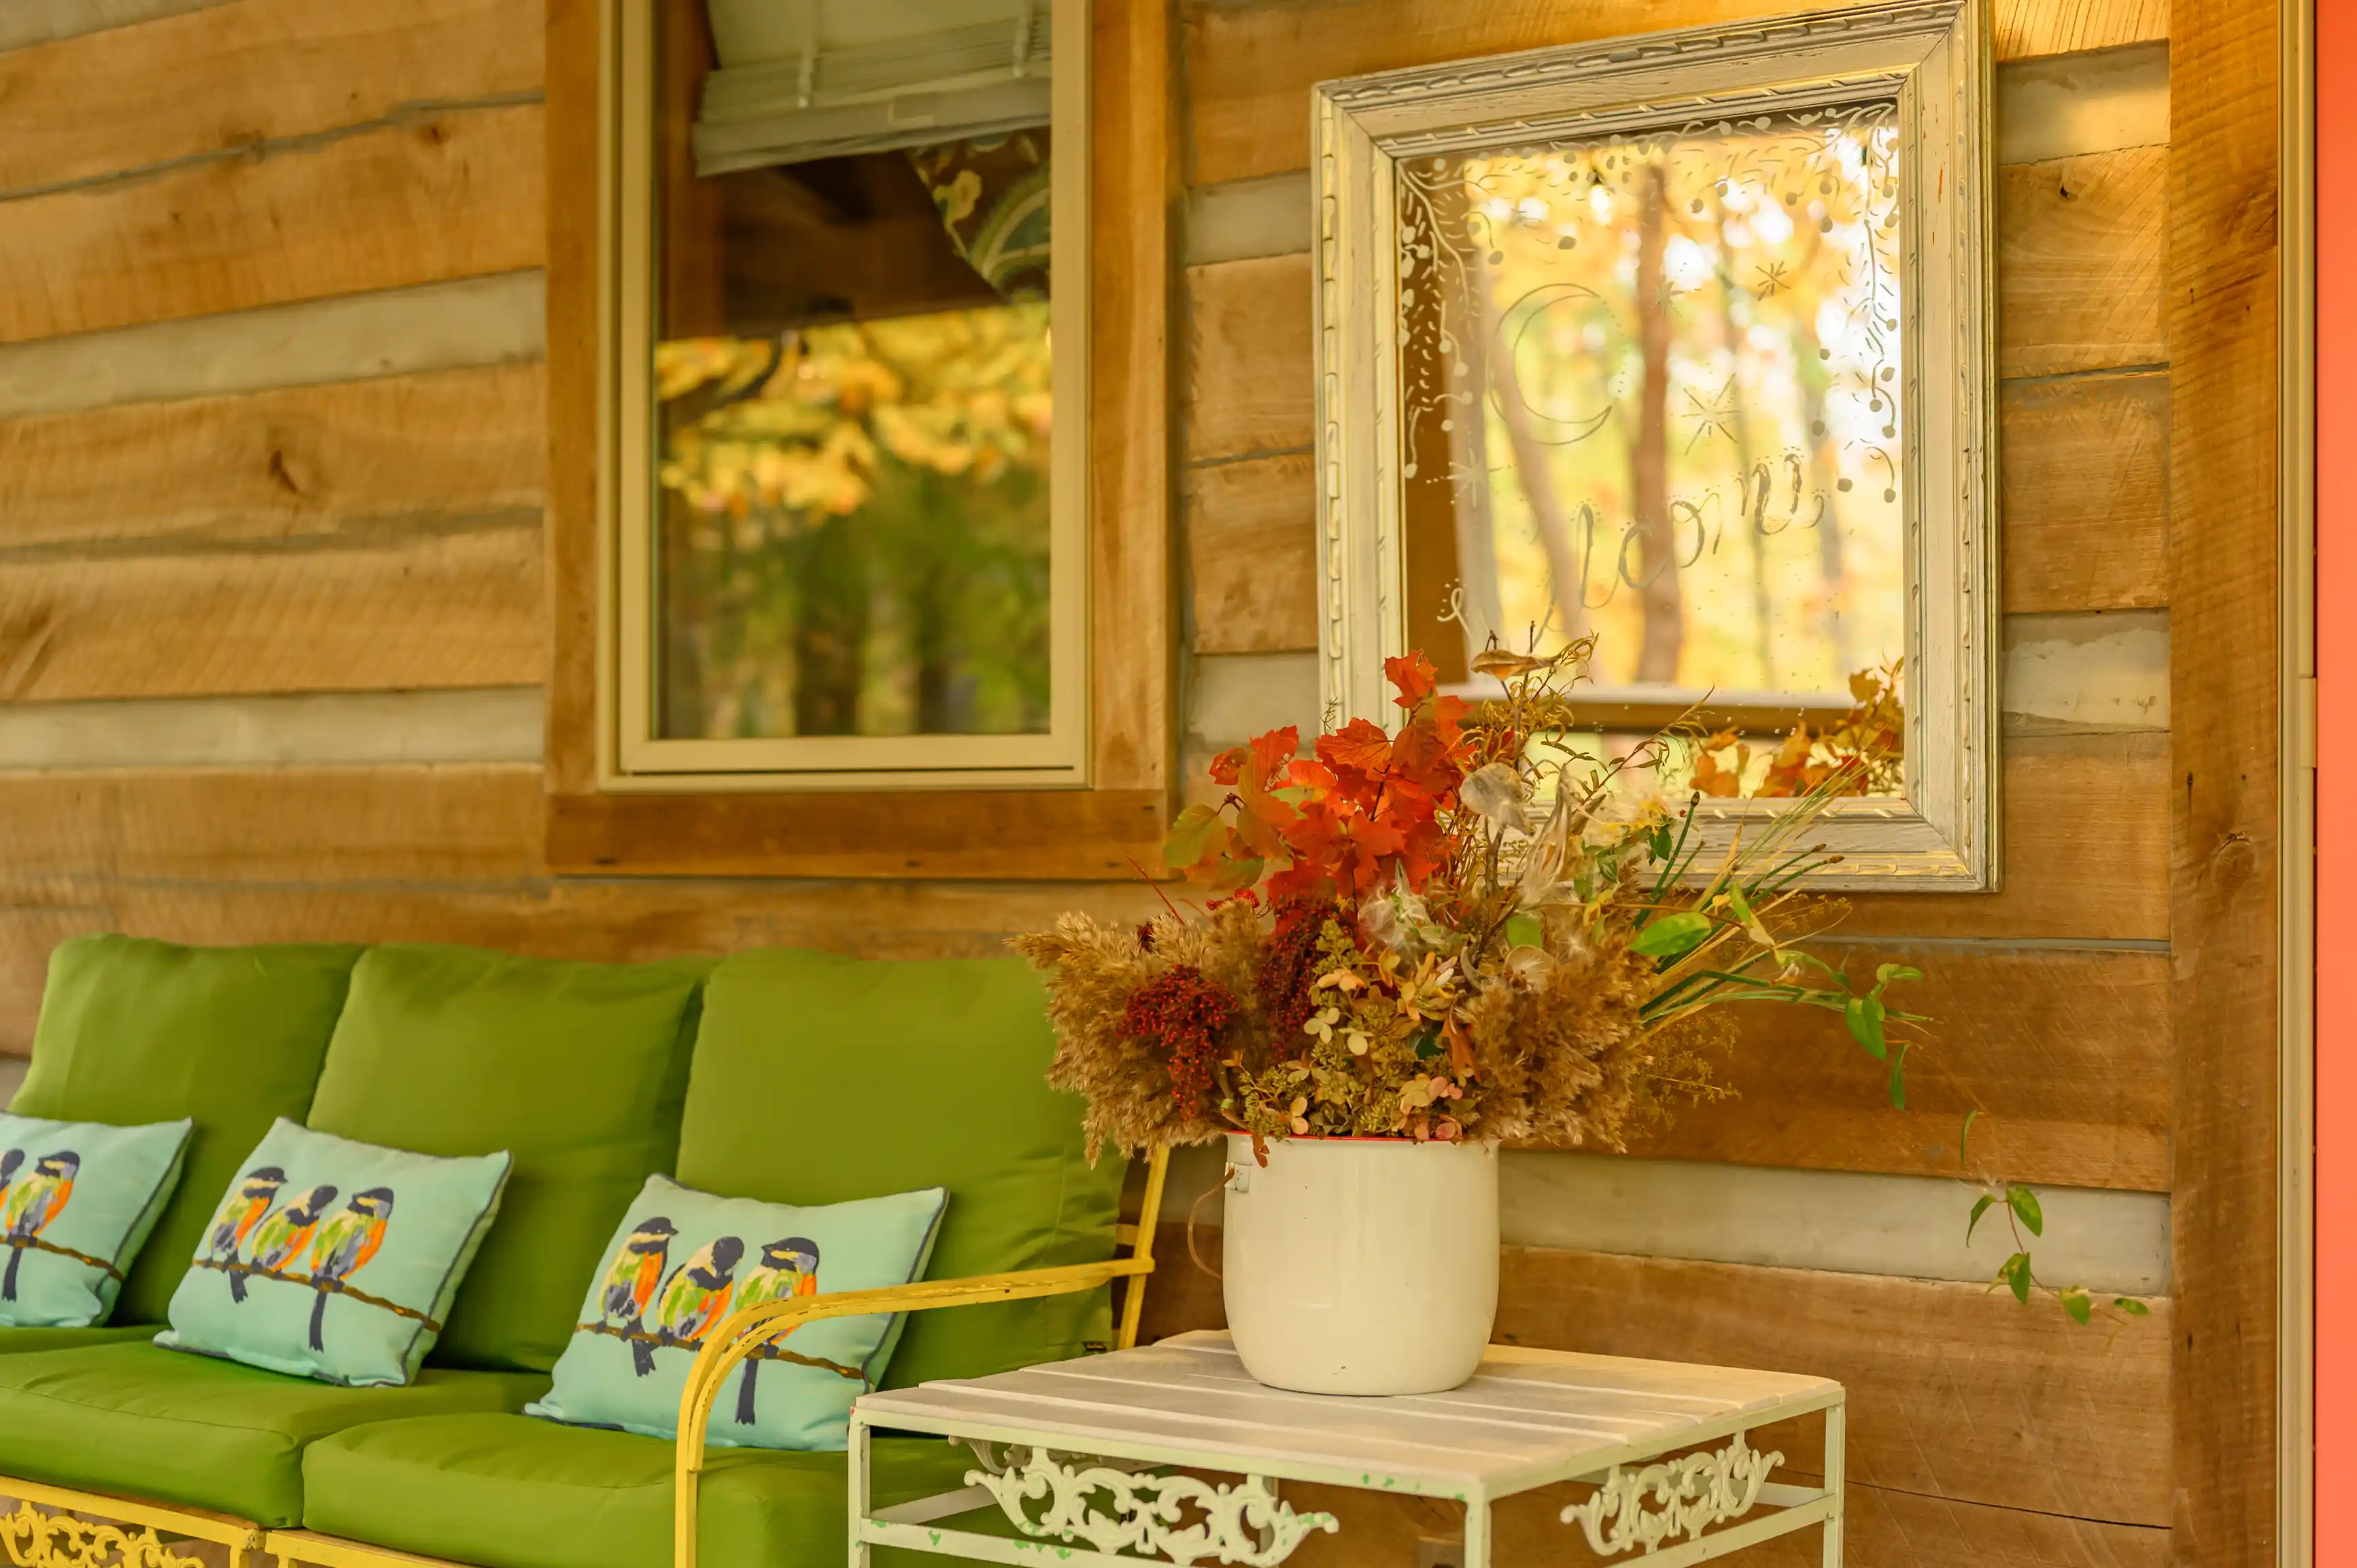 Cozy porch corner with green cushions on a bench, vibrant autumn flower arrangement in a white vase, and a reflective ornate mirror on a wooden wall.